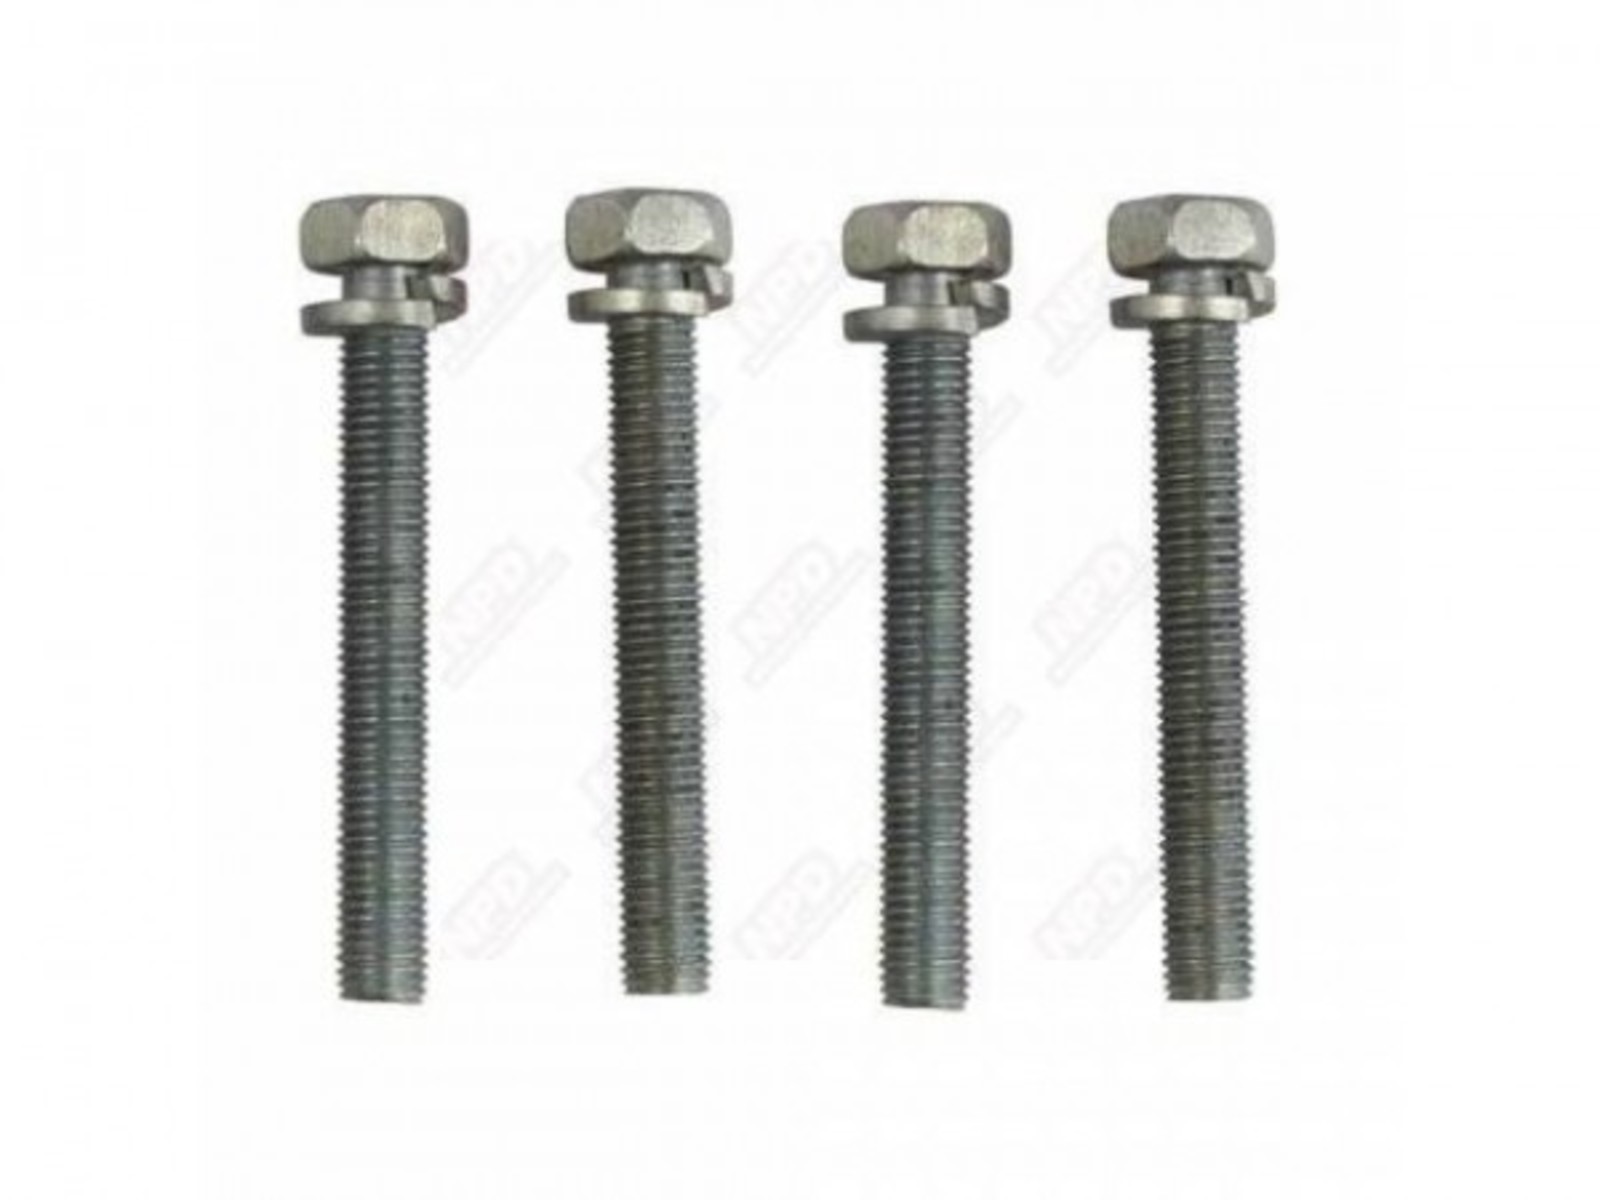 66 Engine Fan Spacer Bolts 1.91"